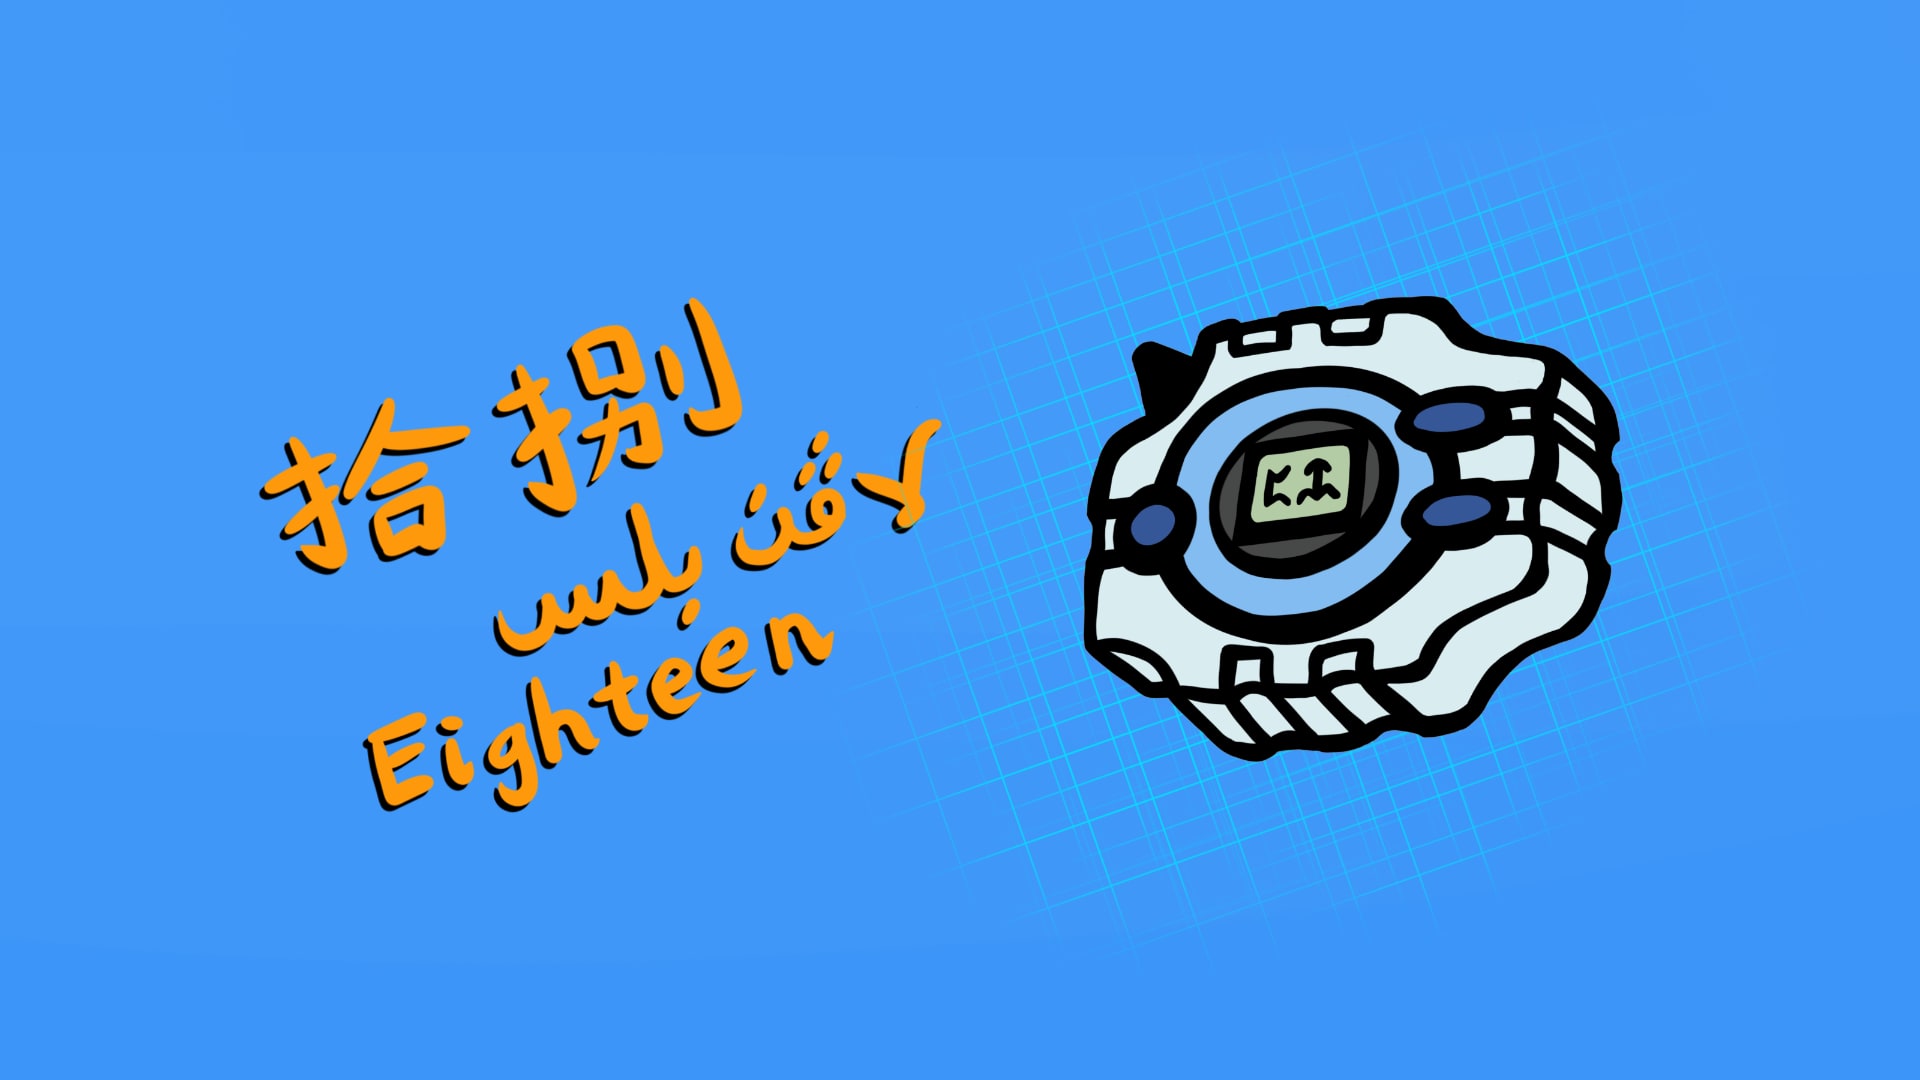 A doodle of a Digivice with the word eighteen in Chinese, Malay, and English on the left.